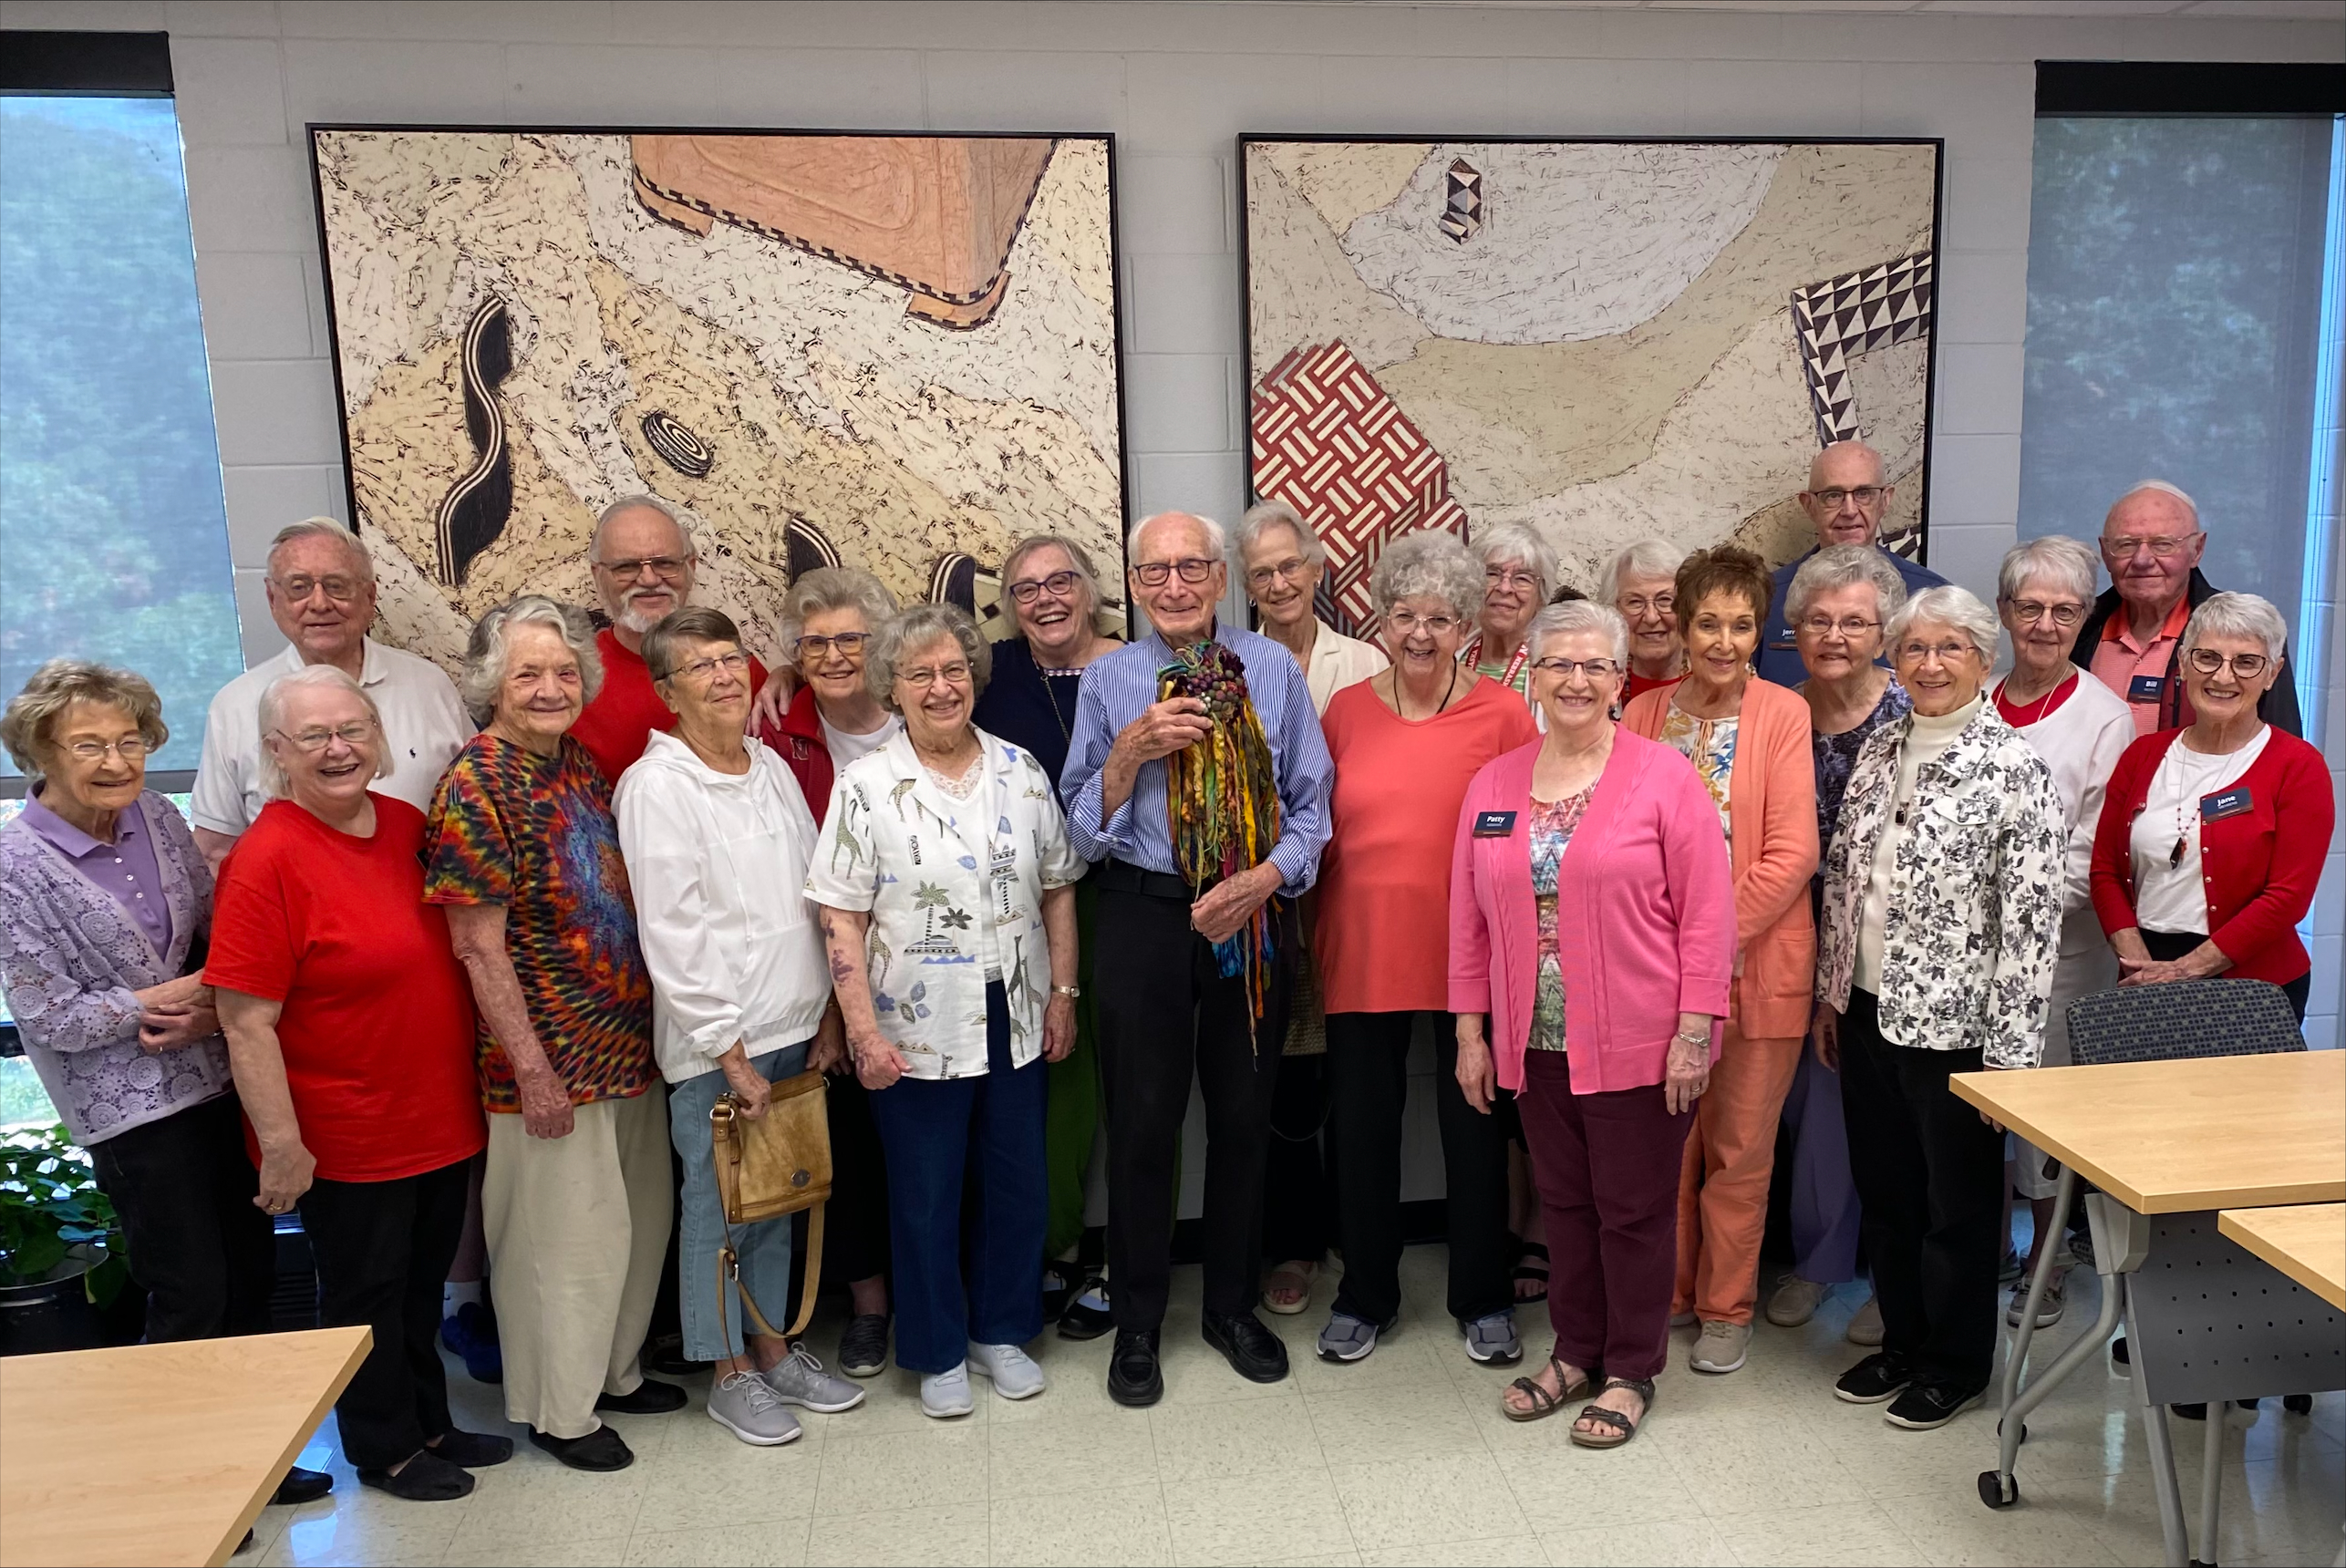 Eastmont Towers residents pose for an image with Dr. Robert Hillestad in the center holding a piece of art.